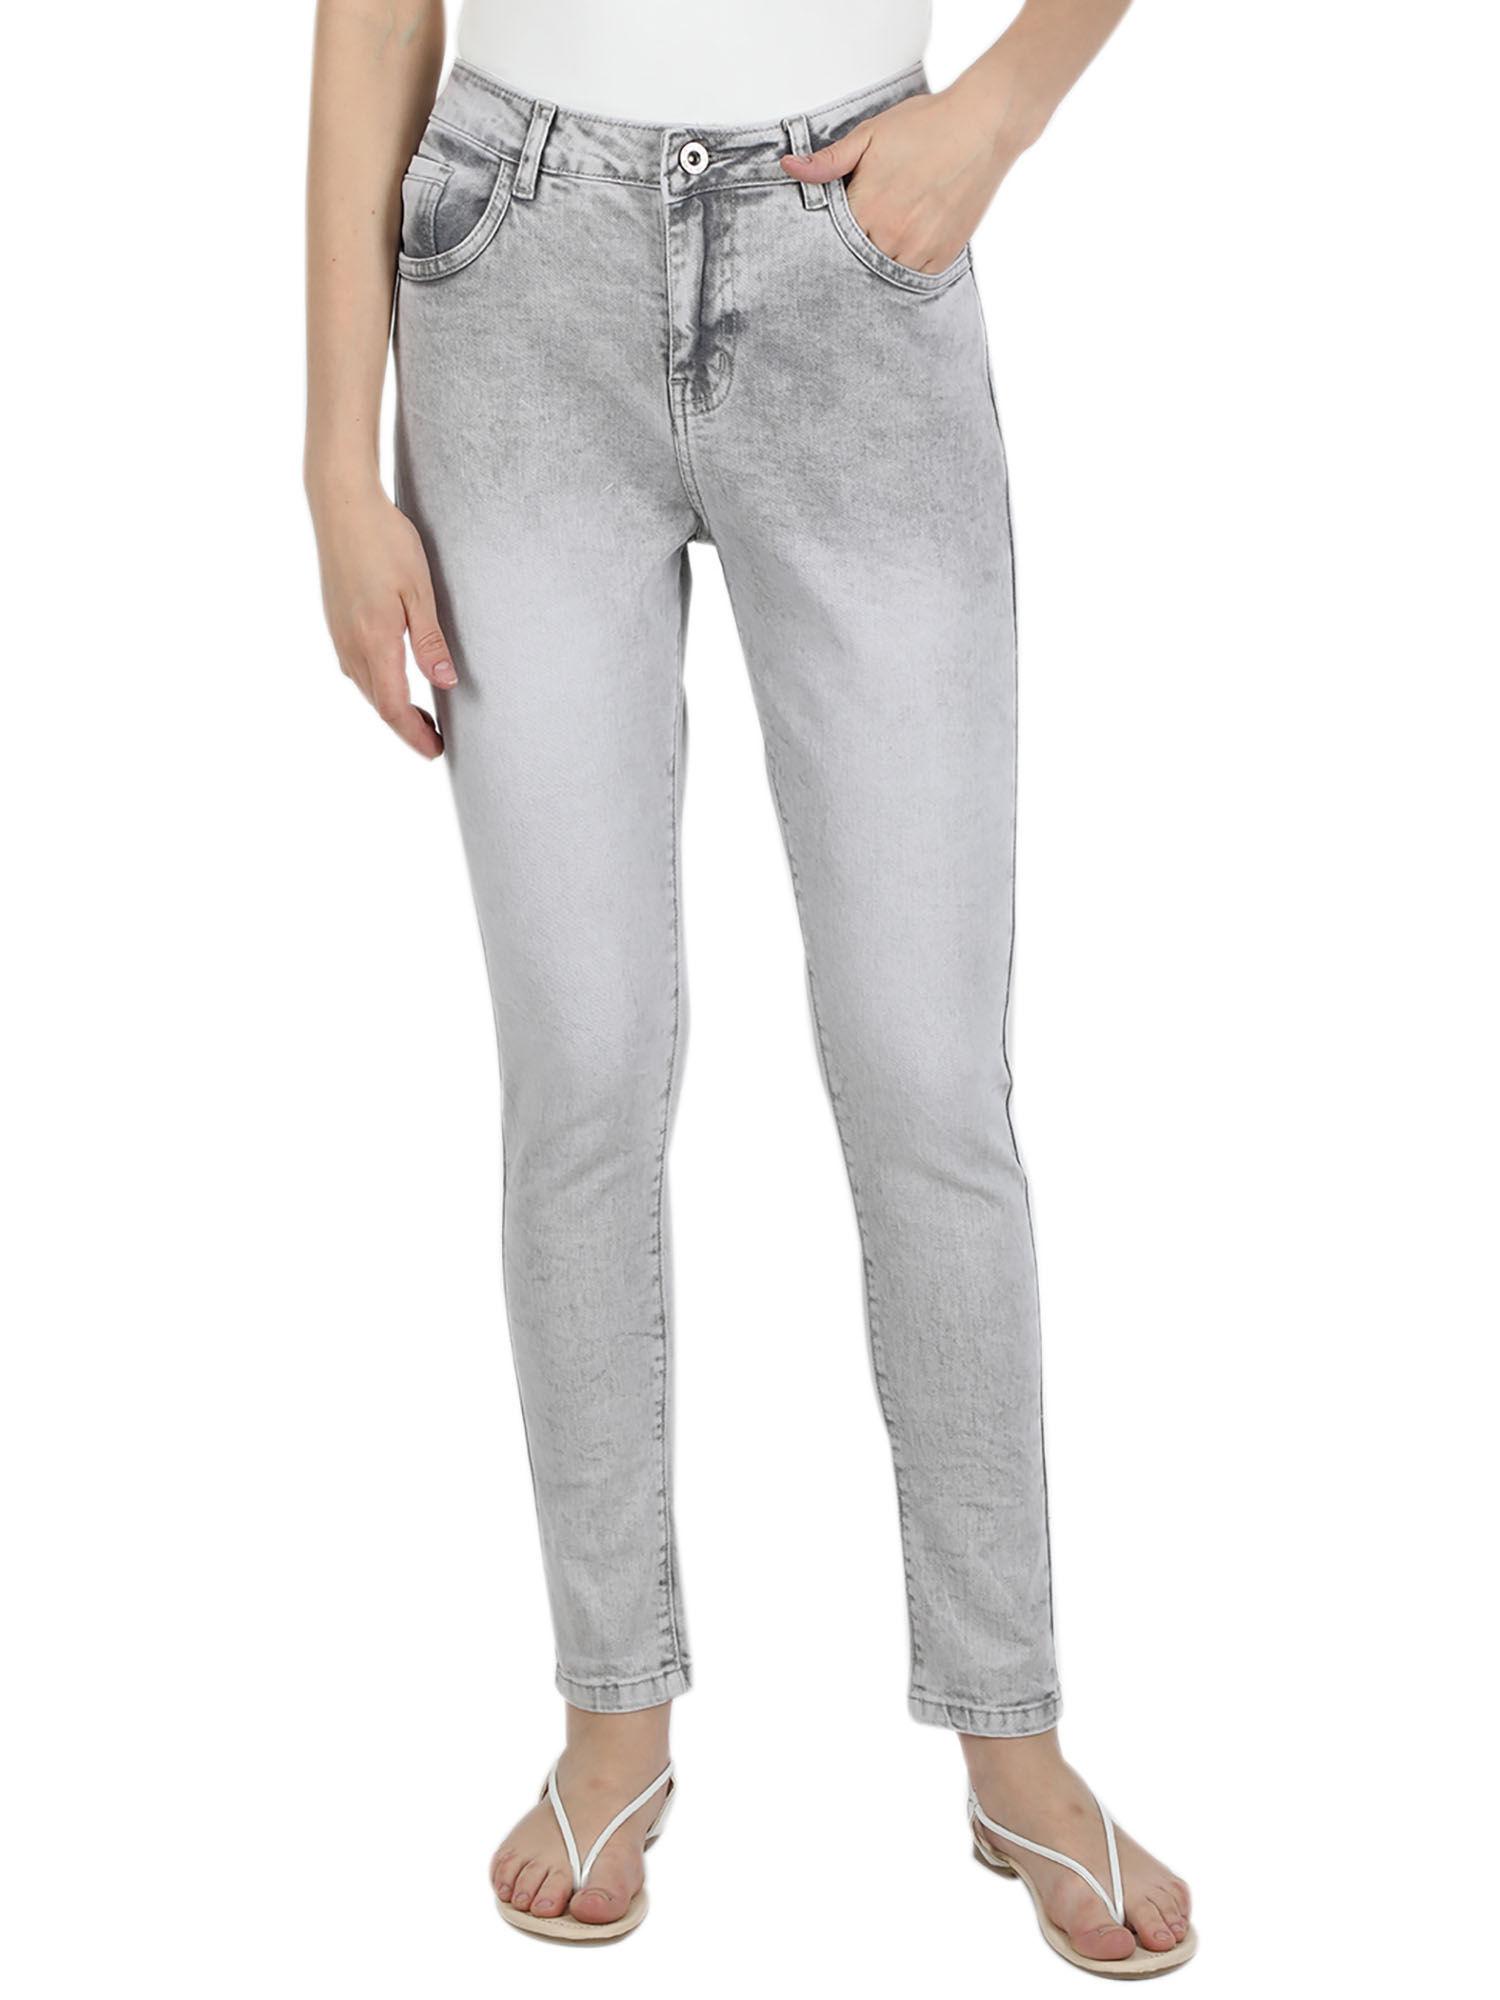 grey-solid-jeans-and-jeggings